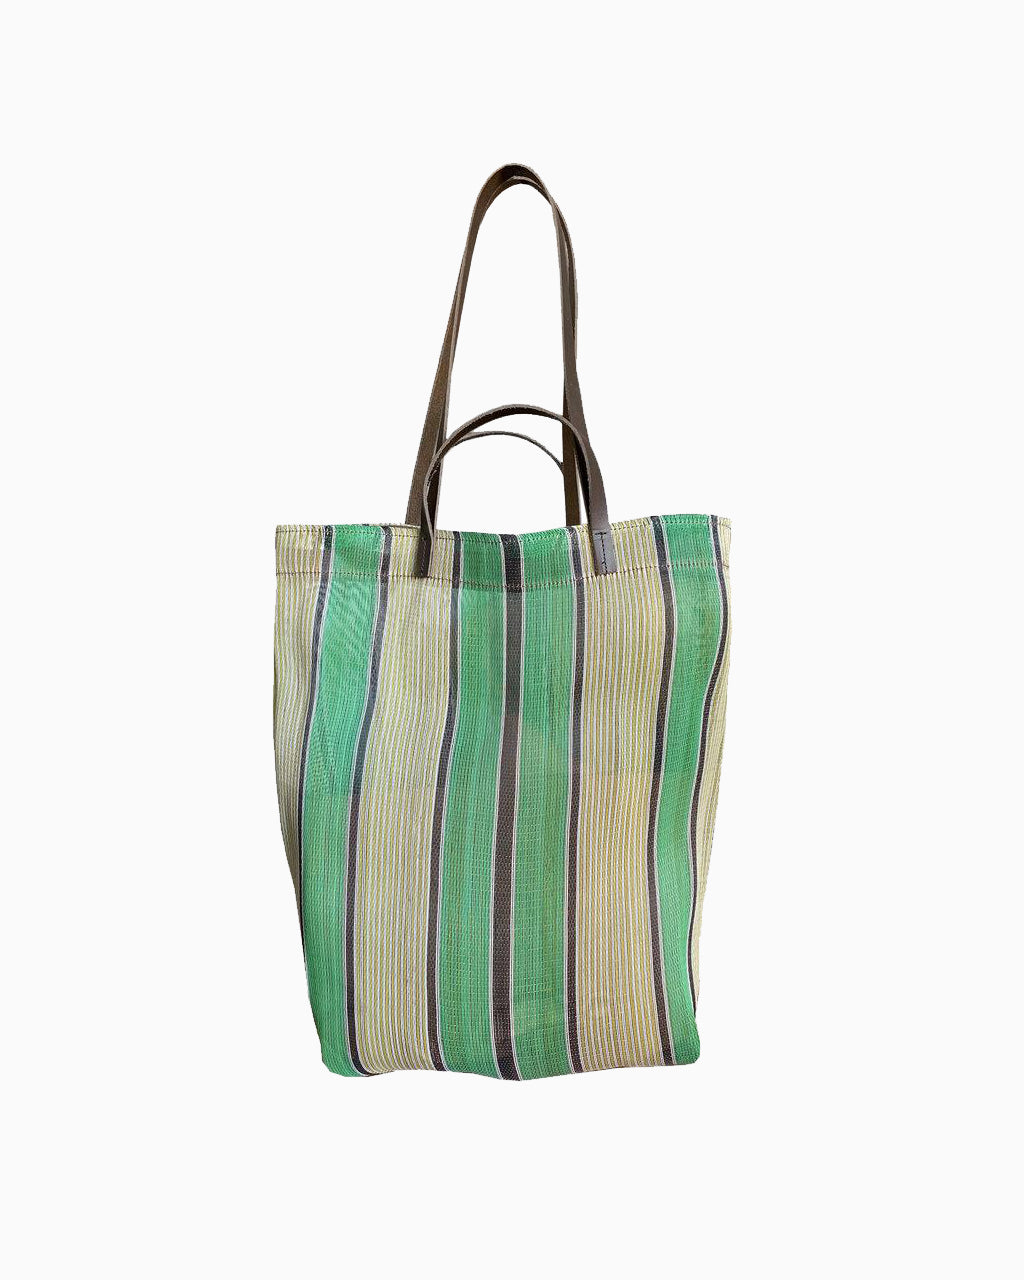 Spencer Devine Assam Market Bag Small - Made with 100% Recycled Plastic